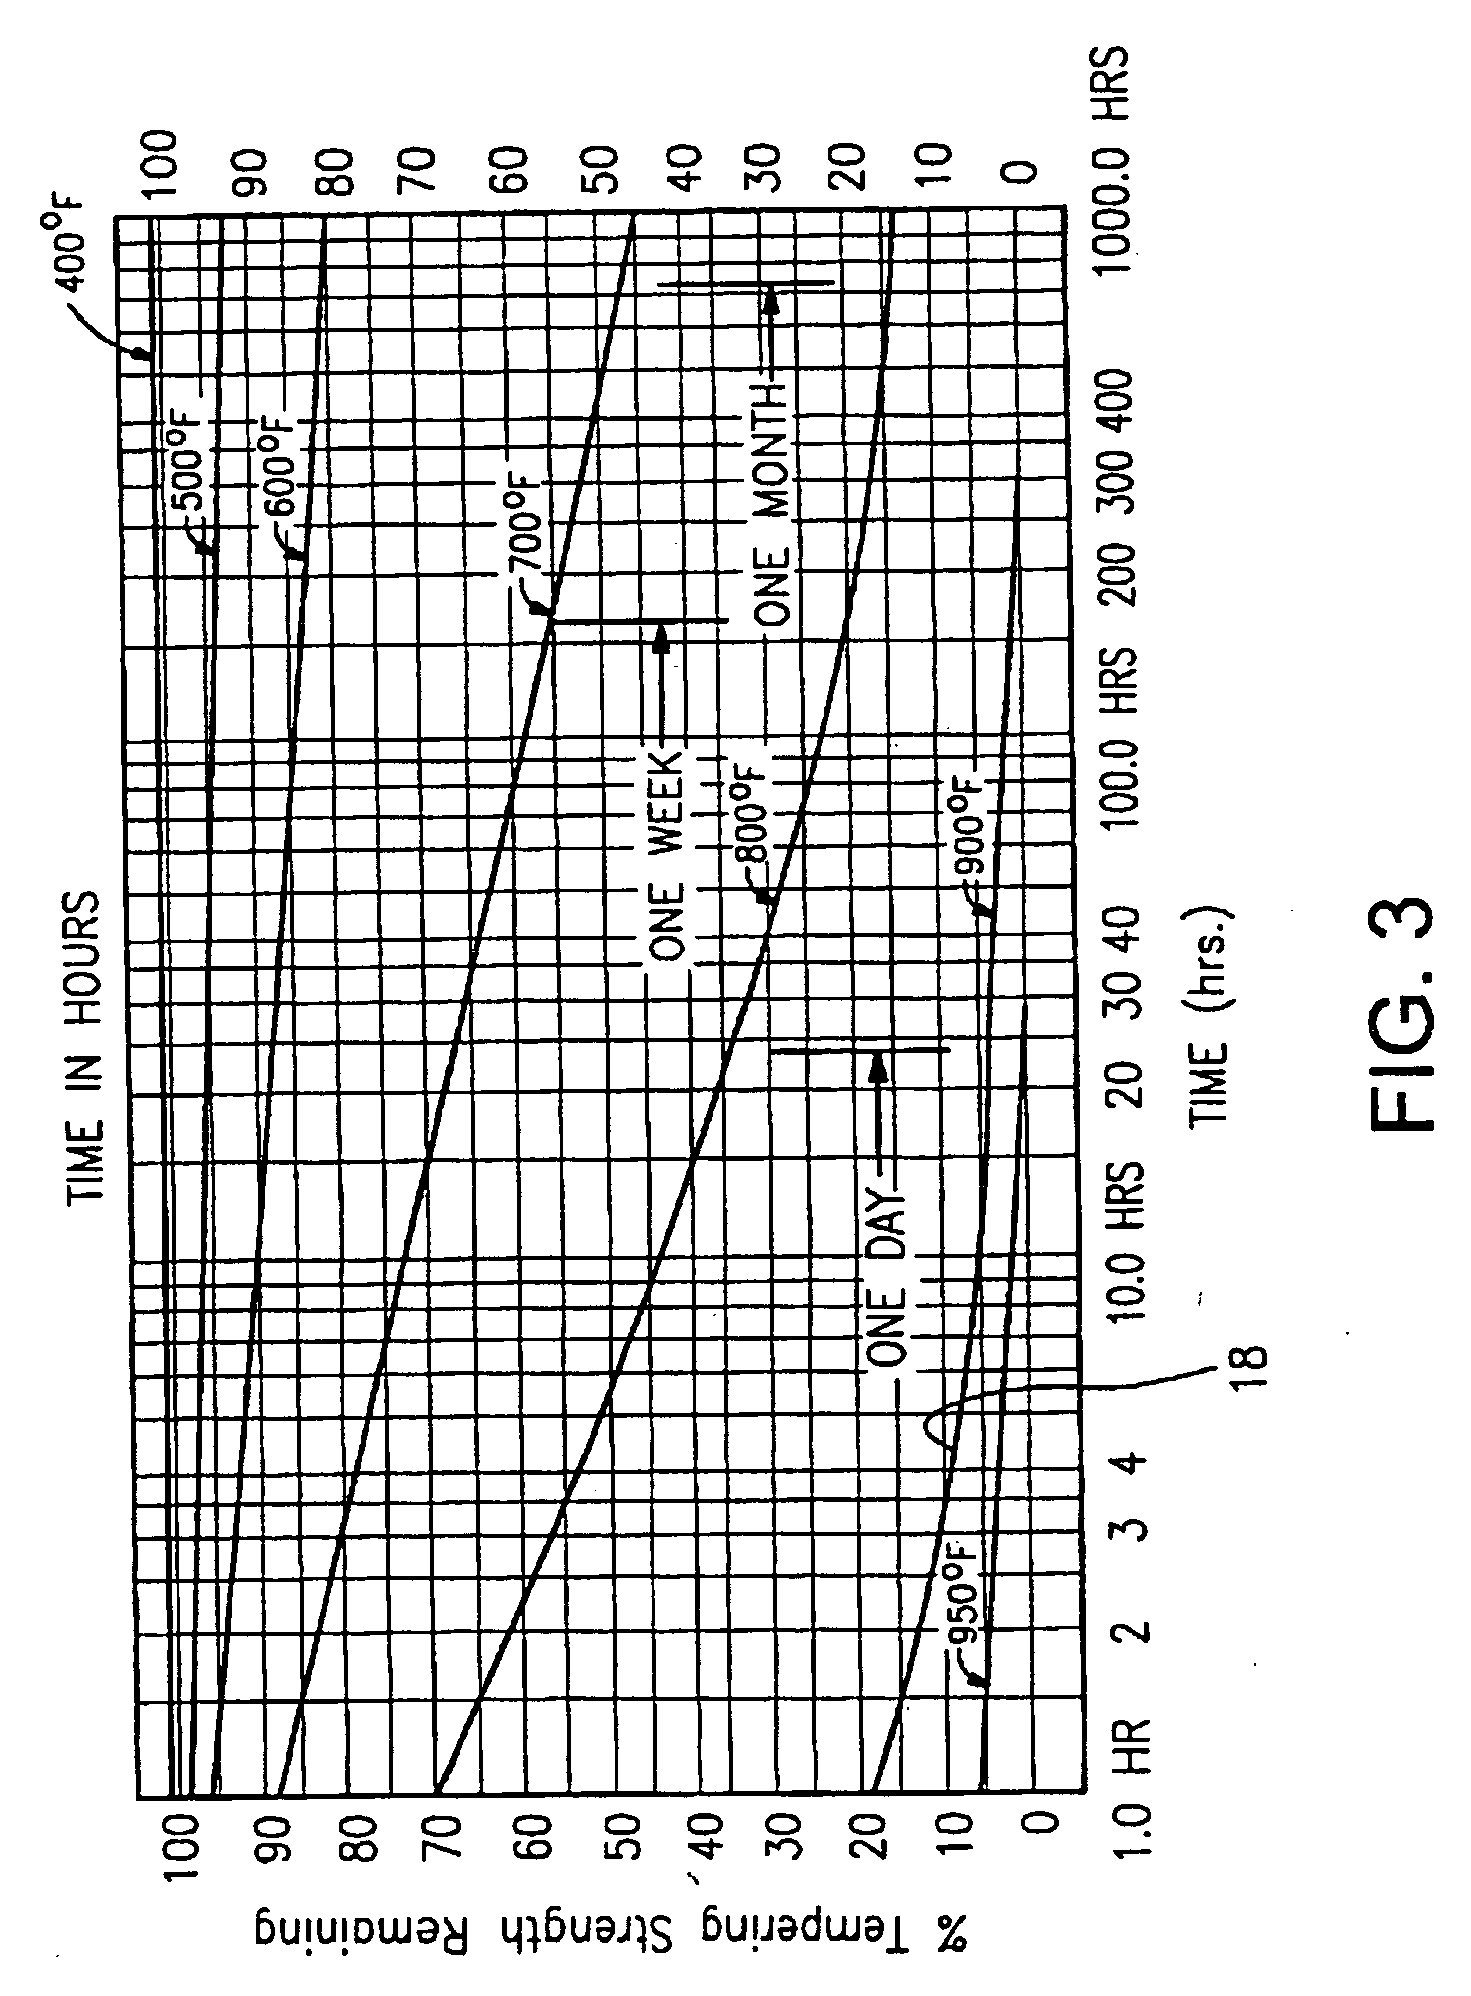 Vacuum insulating glass unit including infrared meltable glass frit, and/or method of making the same